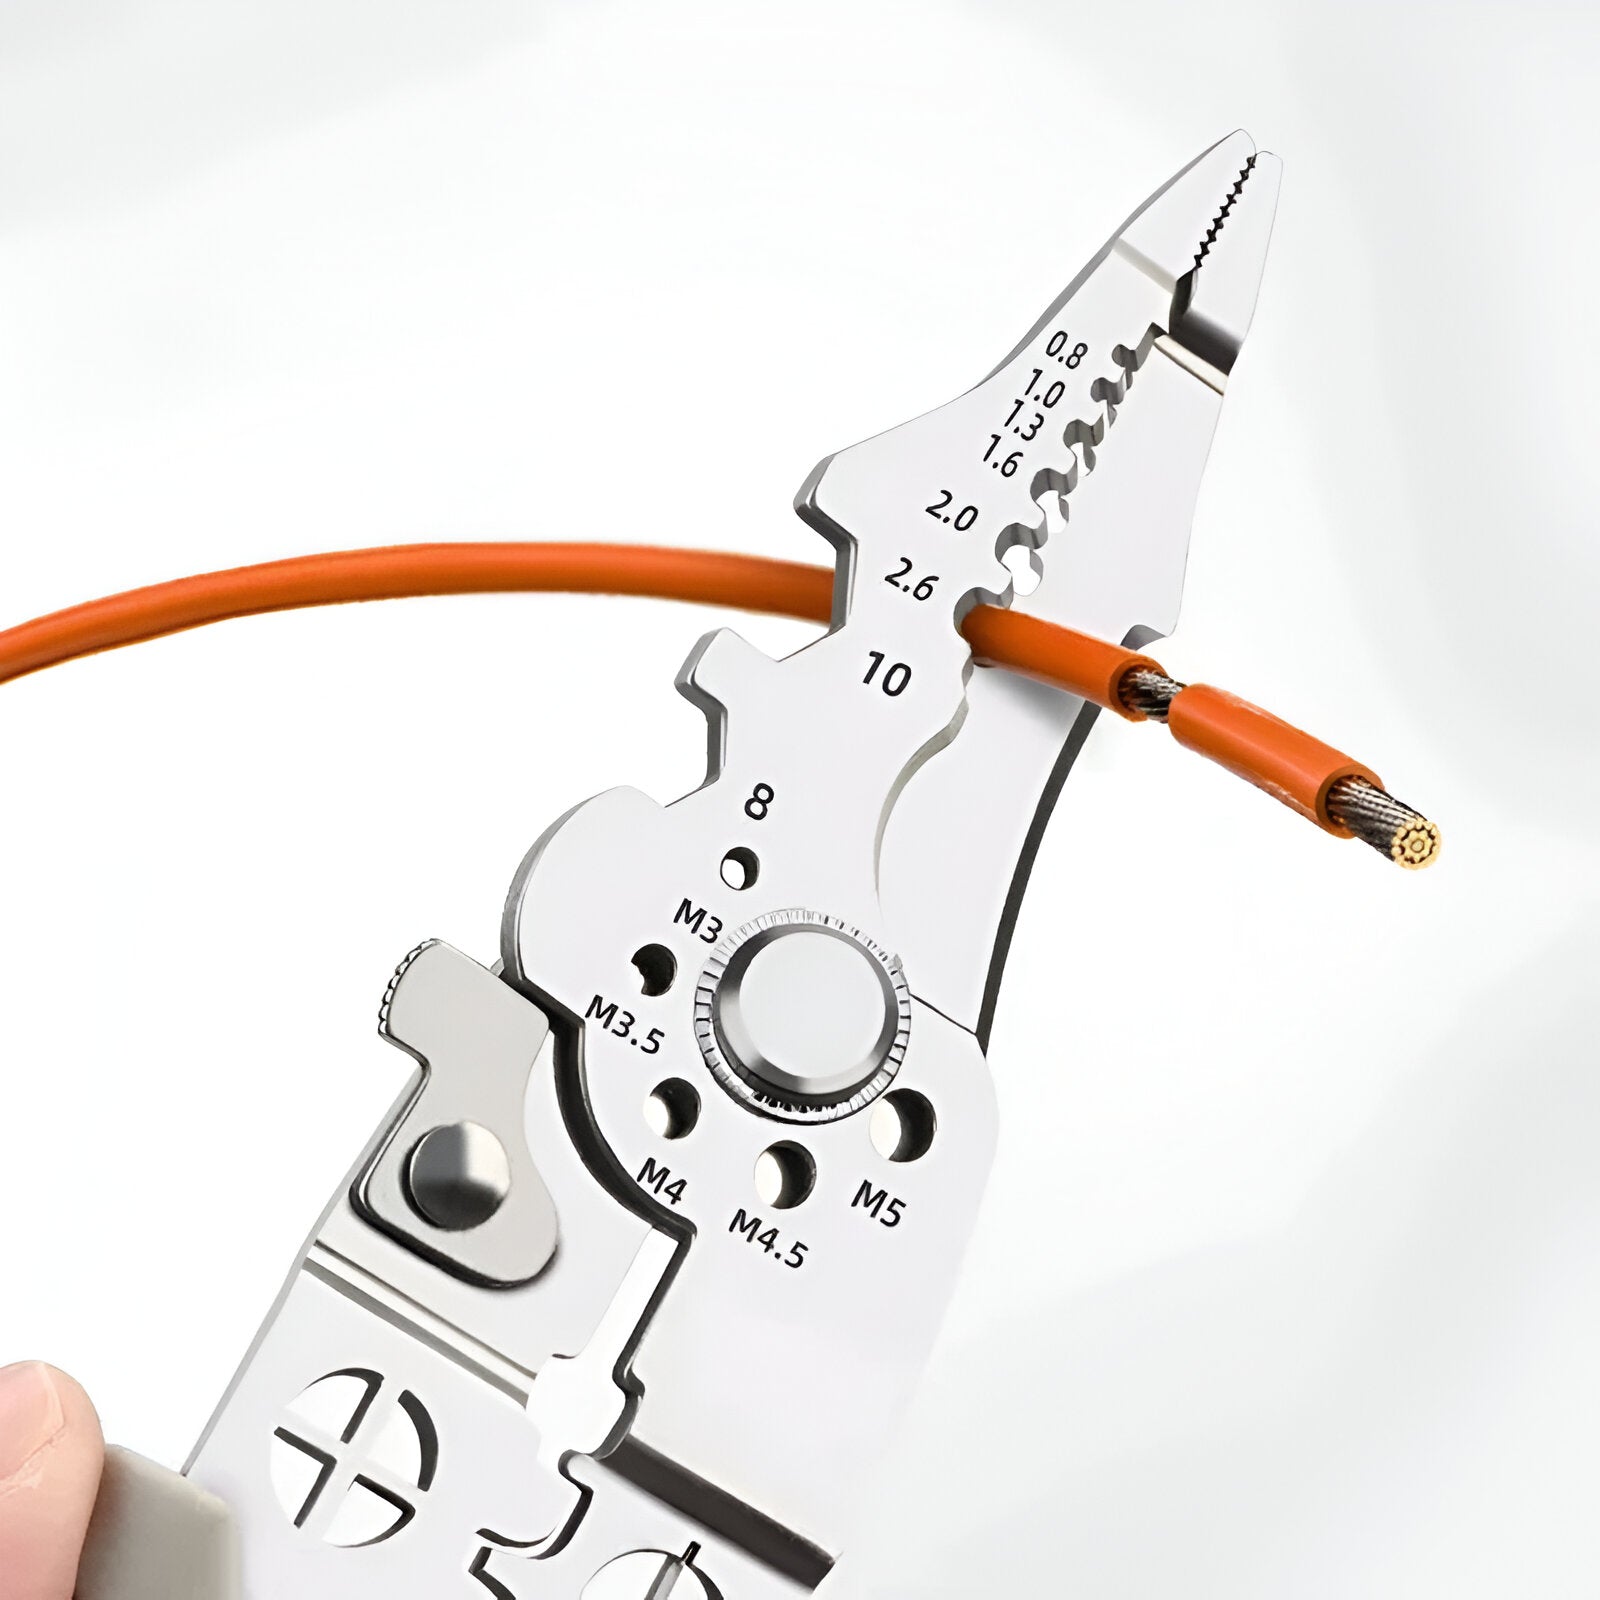 🎉[Special Offer] Get 2 Multifunctional Cable Cutter Pliers for the price of 1🎉